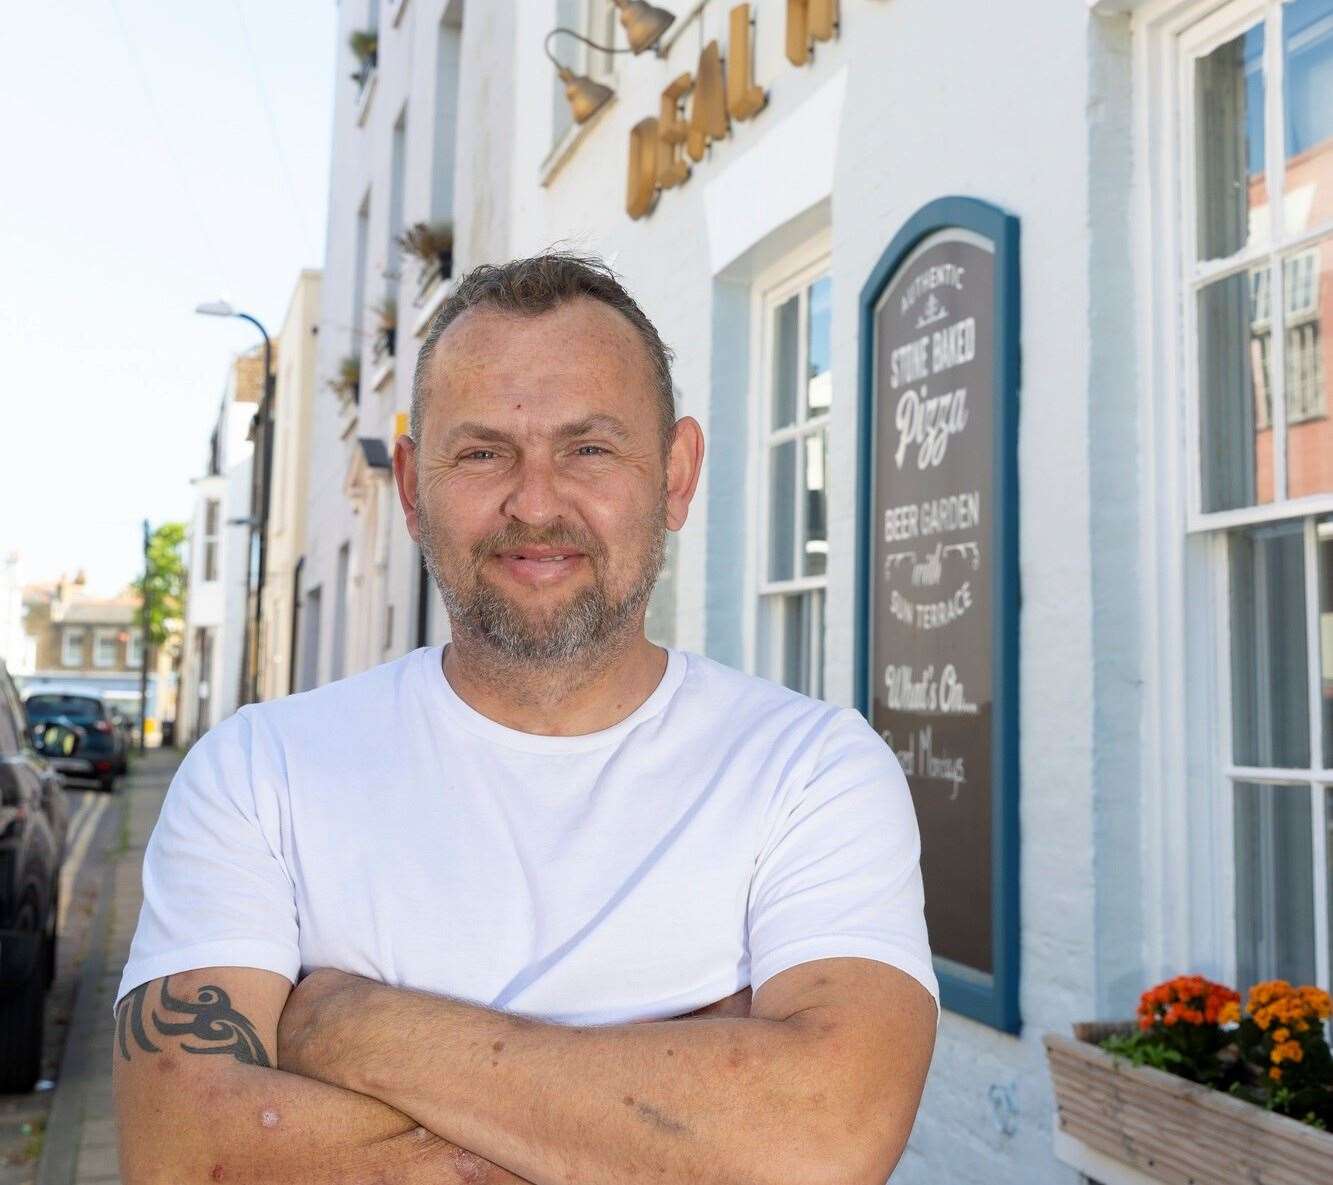 Matthew Brett is the new licensee for the Deal Hoy, where he lived as a child